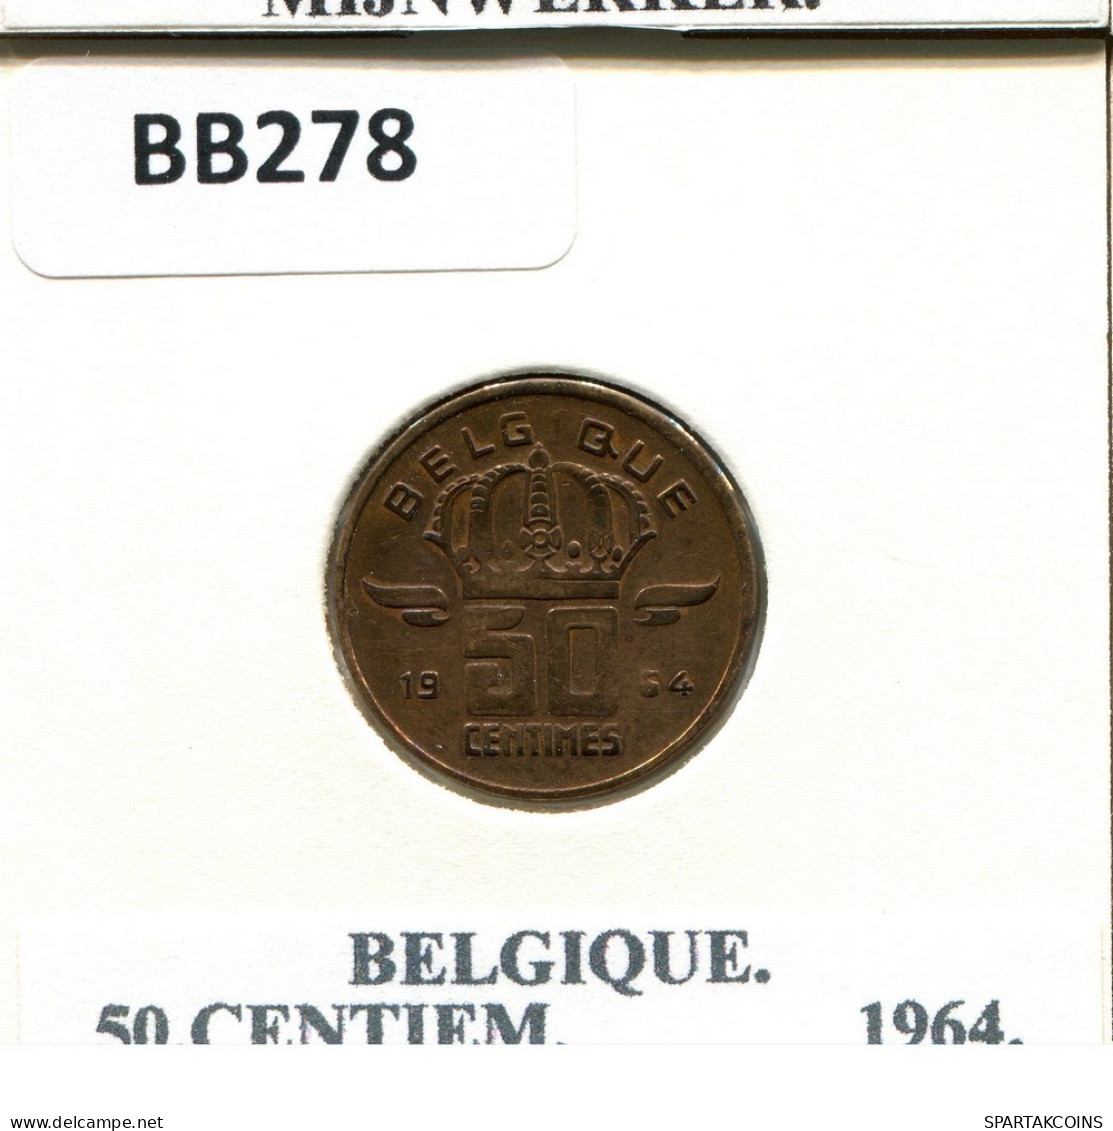 50 CENTIMES 1964 FRENCH Text BELGIUM Coin #BB278.U.A - 50 Cents